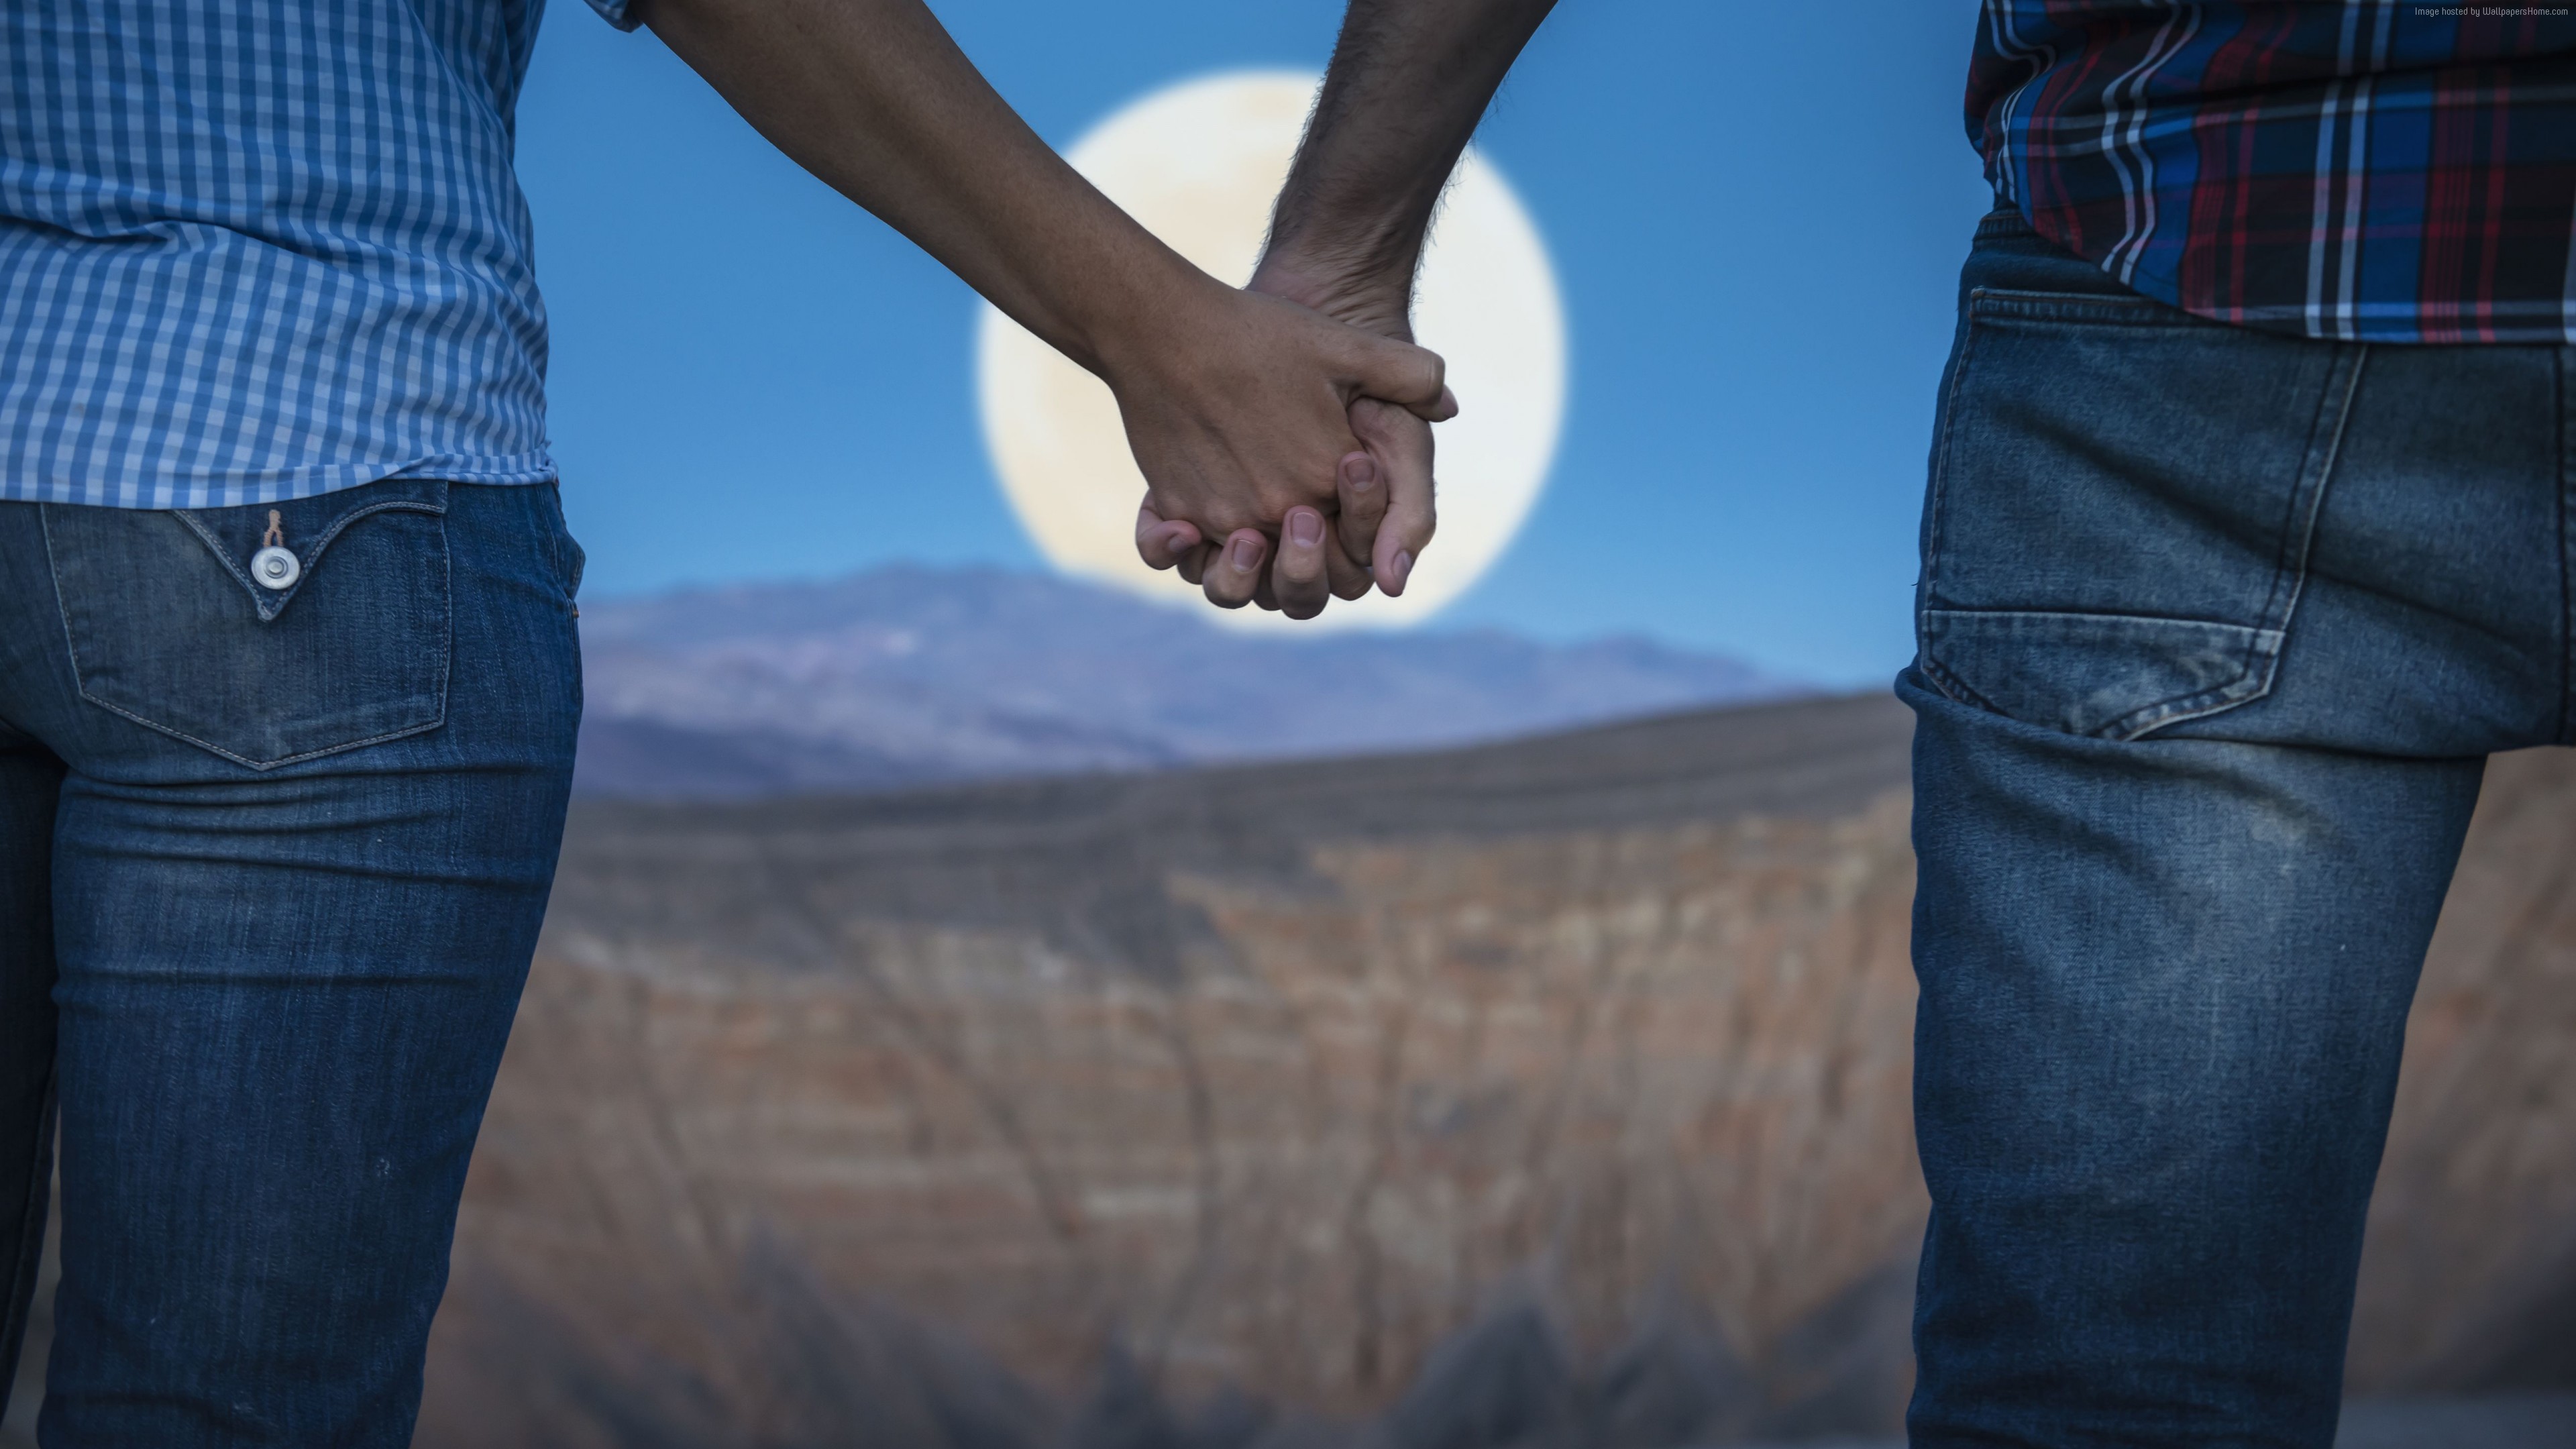 Stock Images love image, hands, moon, 5k, Stock Images